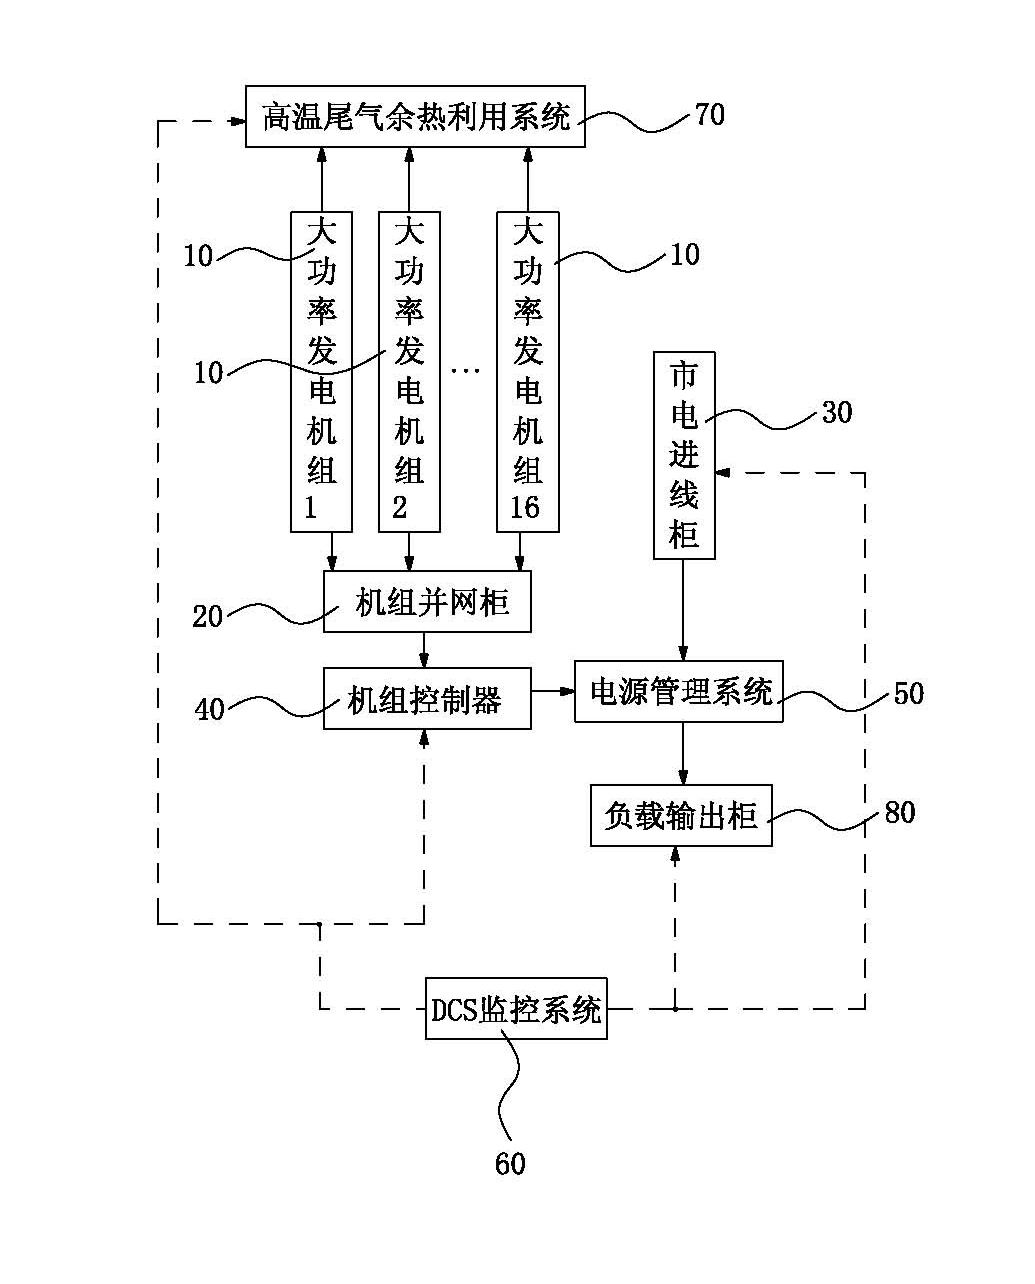 Multiple fully-automatic large-horsepower high-speed integrated parallel and commercial power interconnection system and power supply method thereof